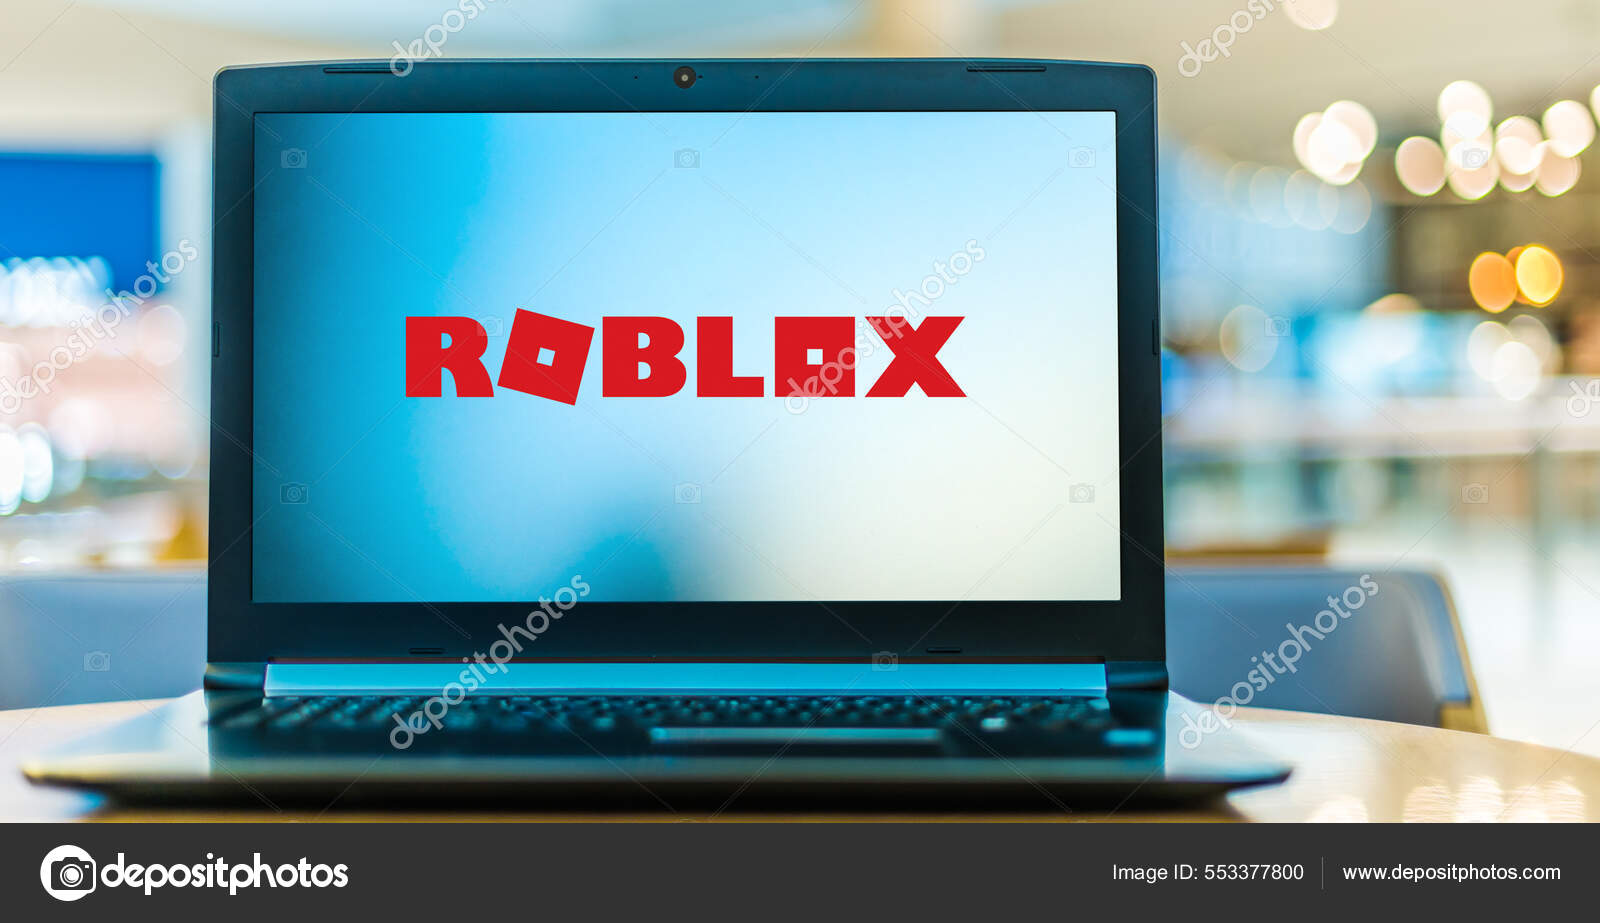 Roblox is an online game platform and game creation system. A